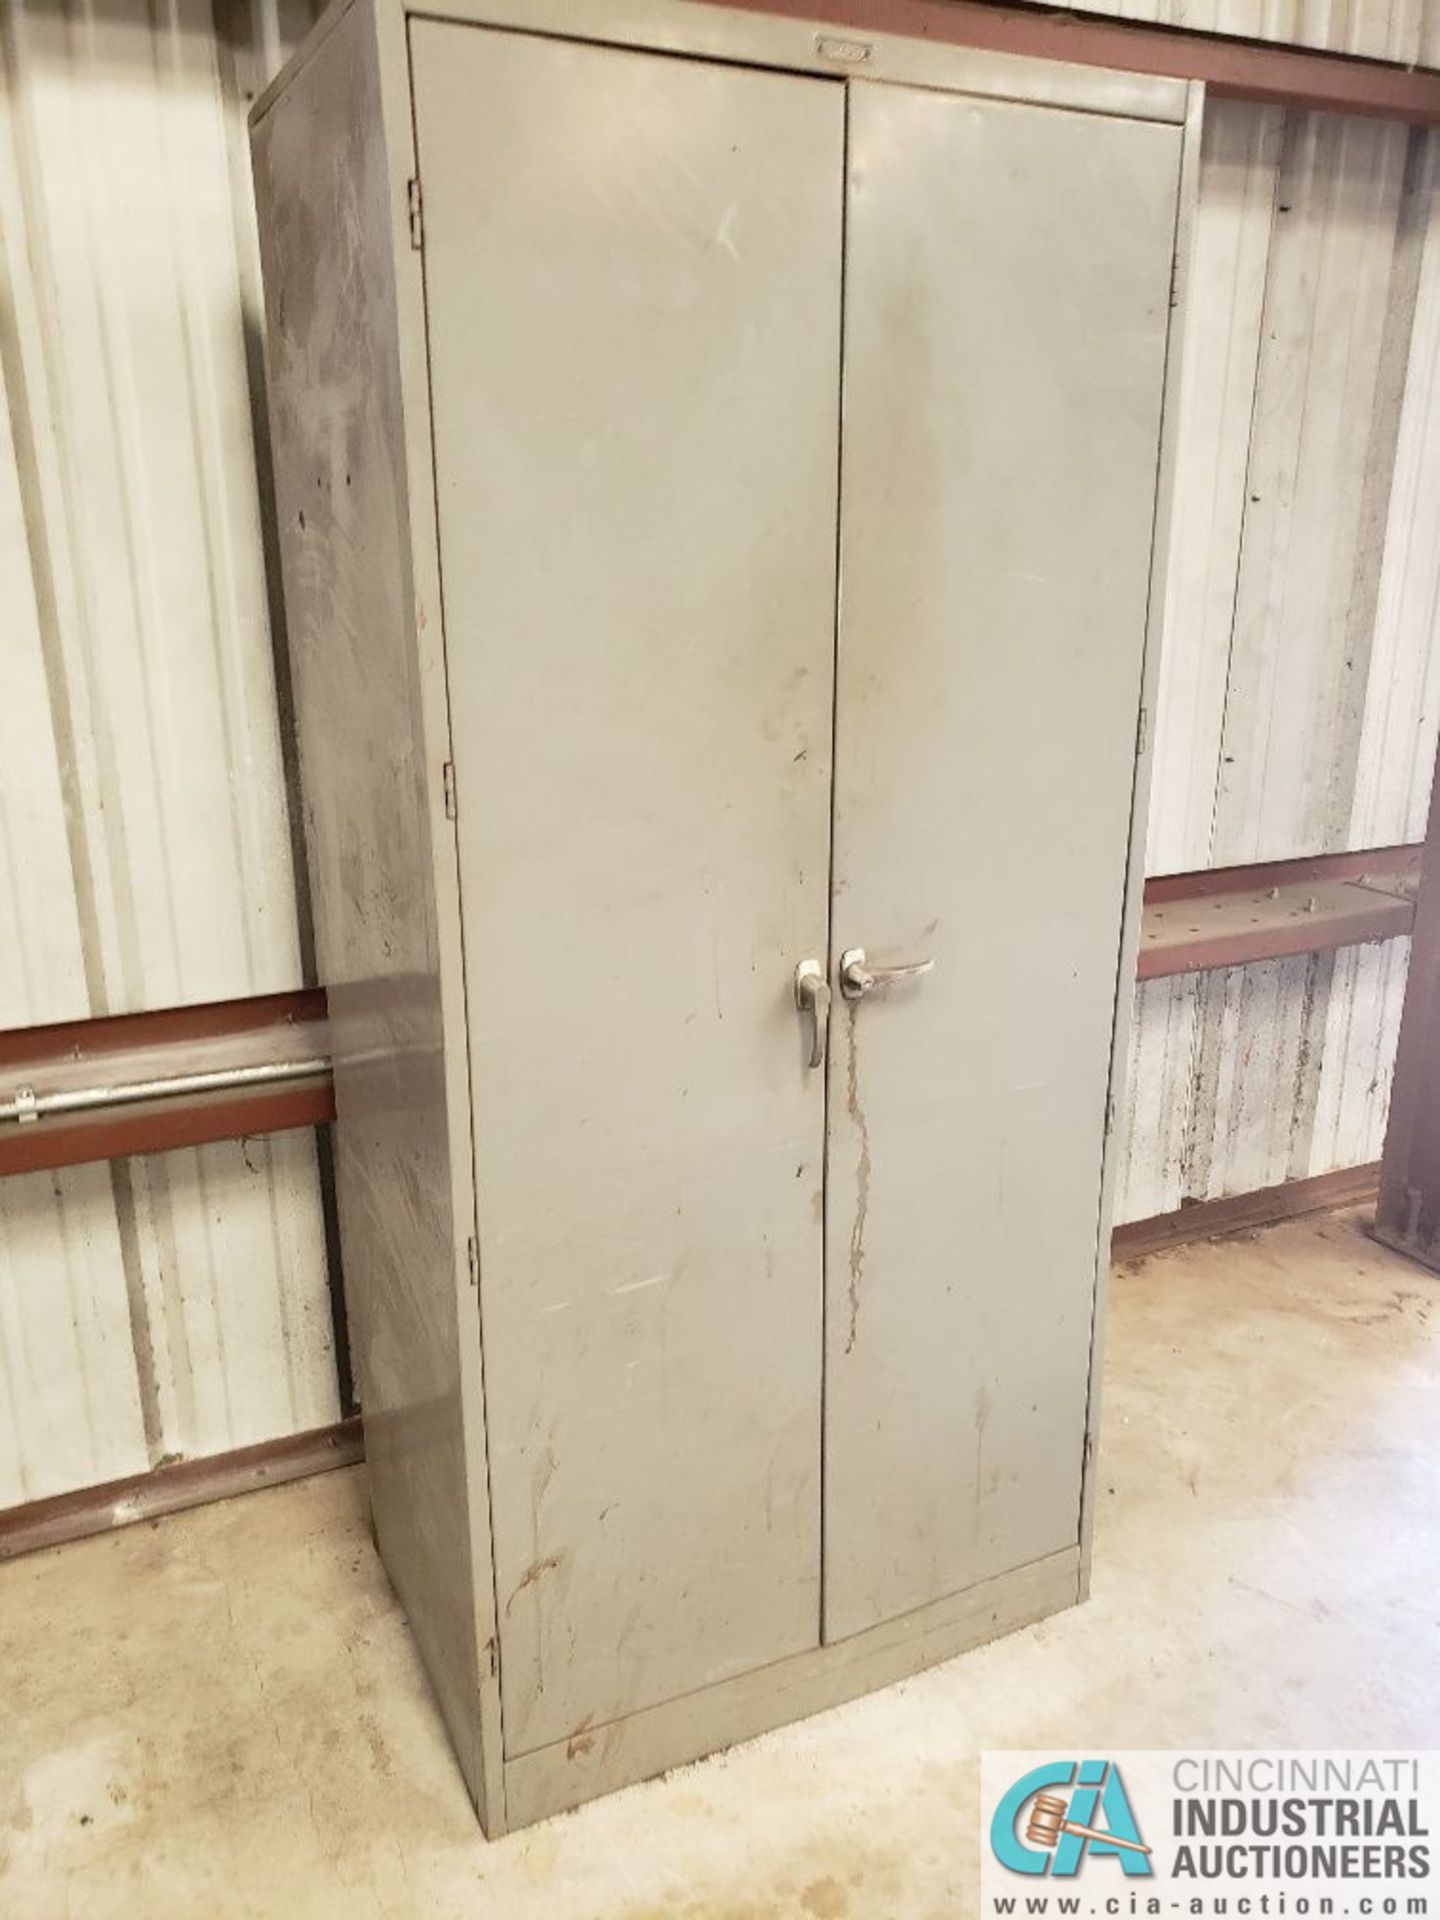 TENNSCO METAL CABINET 36" WIDE X 78" HIGH WITH CONTENTS